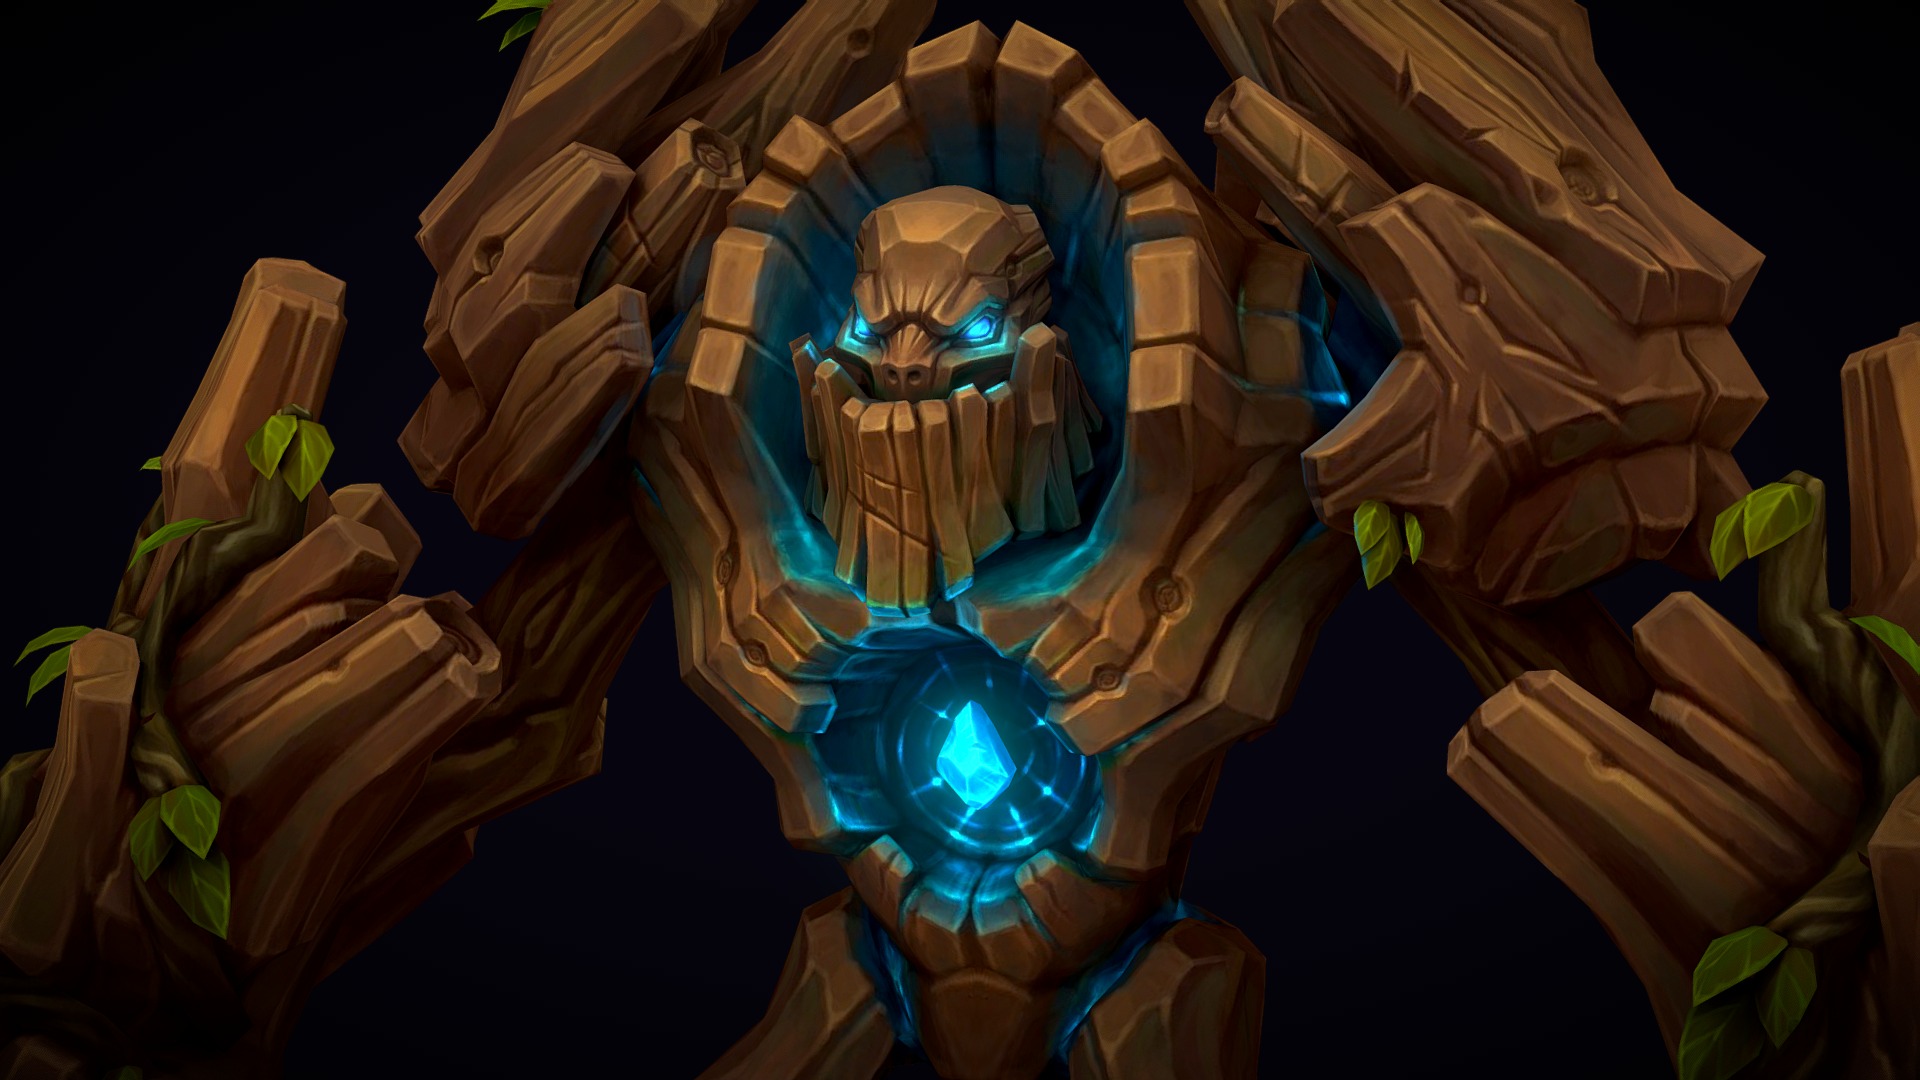 Solak, A-Pose
Responsible for both the concept and 3d model.
https://www.artstation.com/artwork/PwYDn

Content Developer + story:
- Kyle Robson / Mod Ramen - https://twitter.com/jagexramen

Animators:
- Hing Chan (rigging and animation) - https://www.linkedin.com/in/wing-hing-chan-7aaa9340/
- Victor Gil - http://www.victorgilanimator.com/

Environment artist (responsible for the whole Lost Grove area, including Solak's arena):
- Alan O Brien - https://www.artstation.com/alanobrien
(A huge thumbs up to Alan for helping me out with the environment assets I used on the little Solak's diorama) - Solak - APose - Runescape - 3D model by bernardo cristovao (@bernardocristovao) 3d model